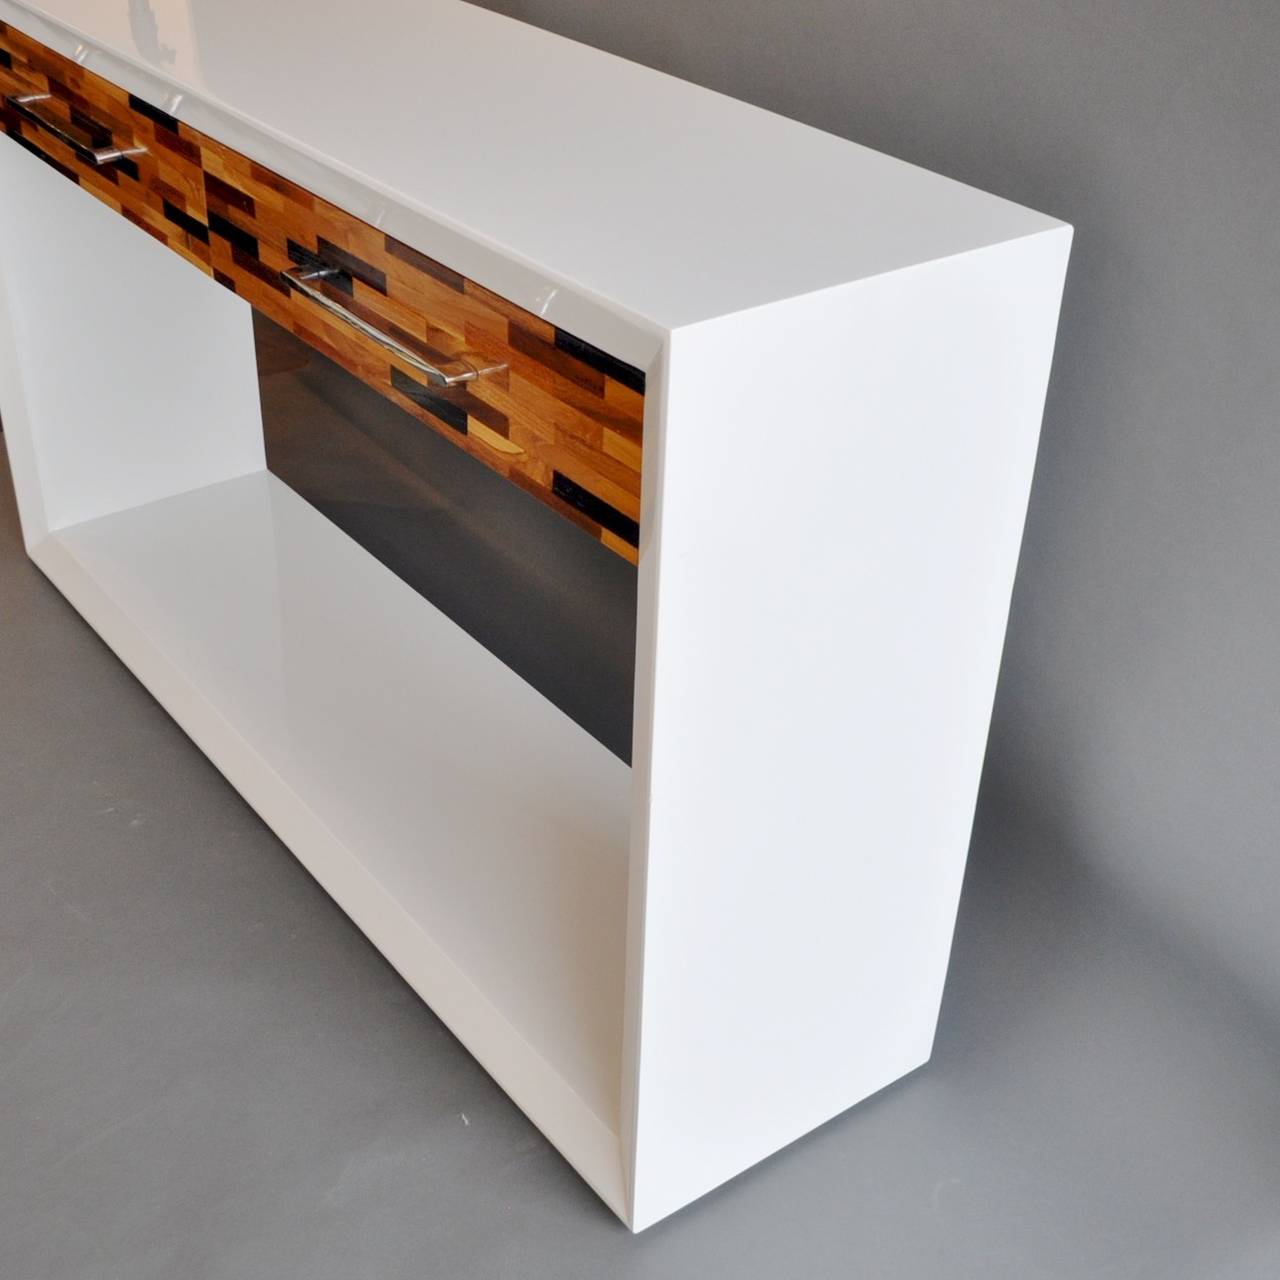 Modernist White Lacquer Console with Parquet Drawer Fronts 1